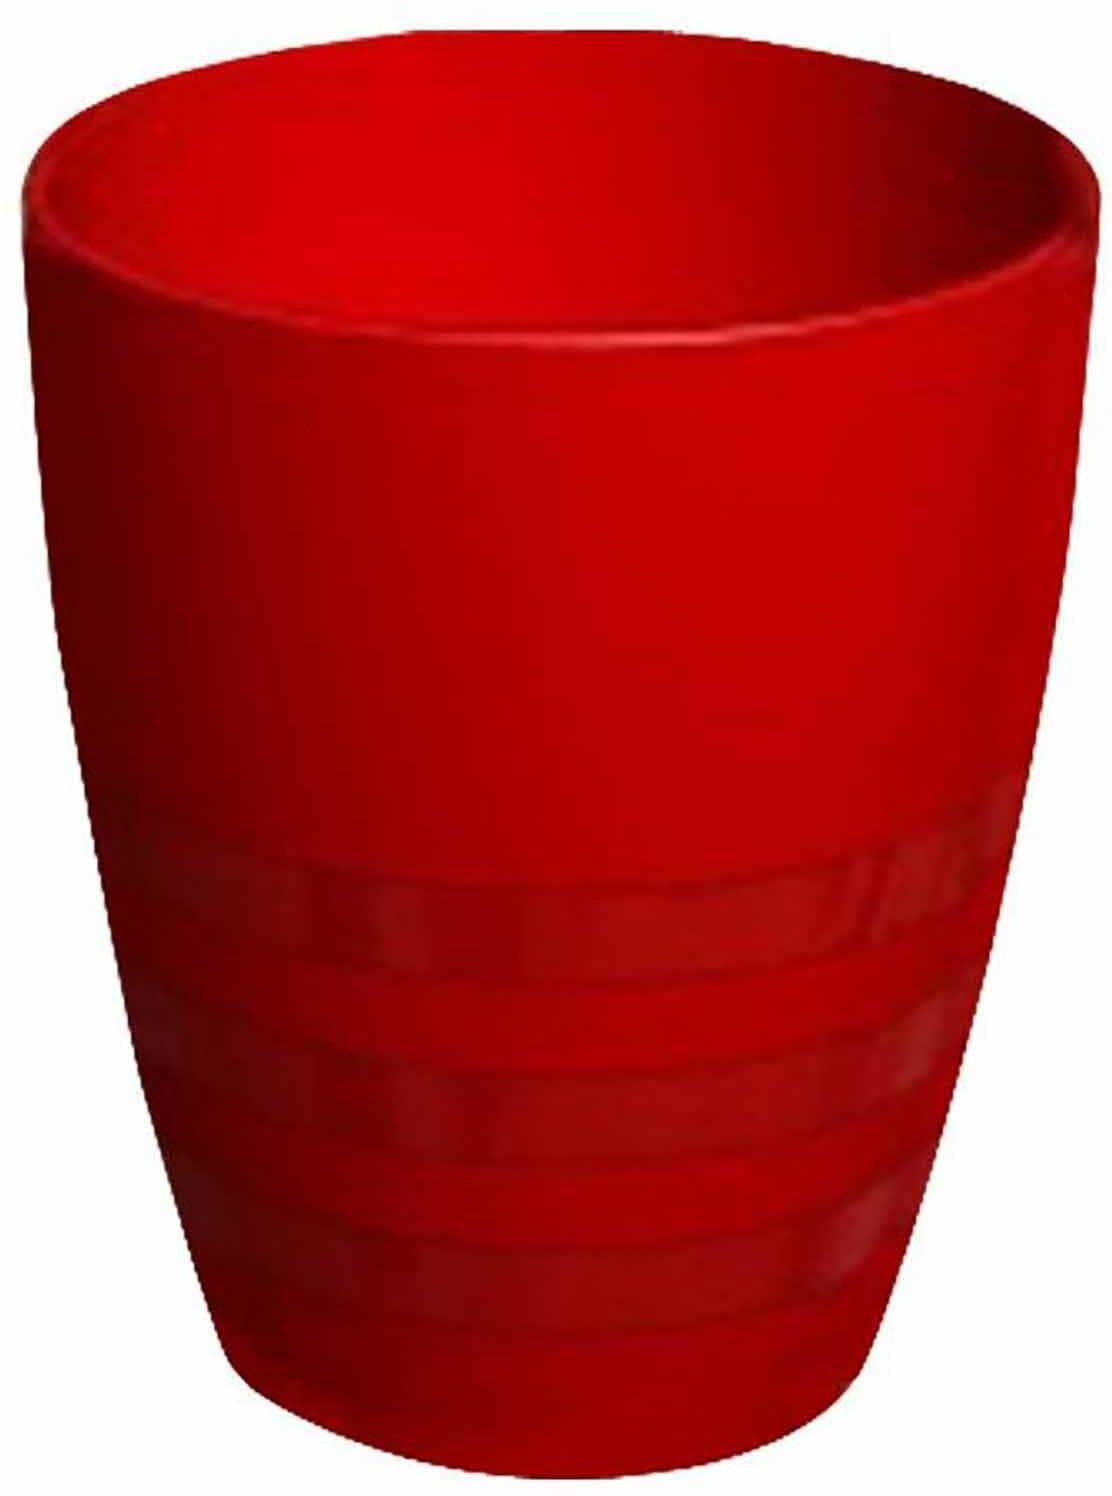 M-Design Eden Small Cup - 300ml - Red